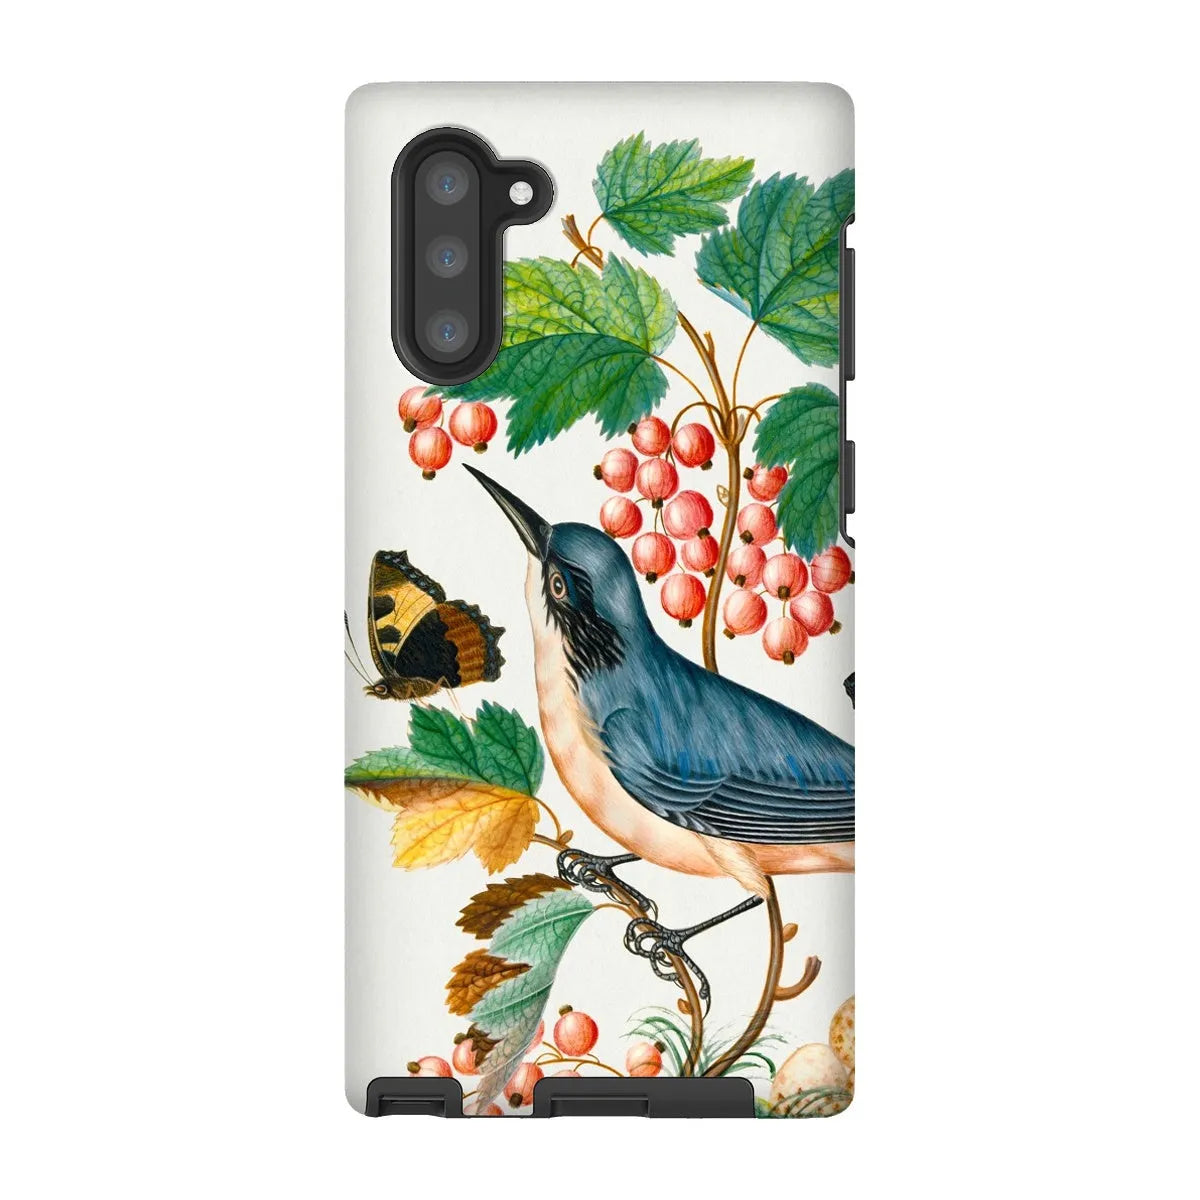 Warbler Admiral Wasps & Ants - Art Phone Case - James Bolton - Samsung Galaxy Note 10 / Matte - Mobile Phone Cases